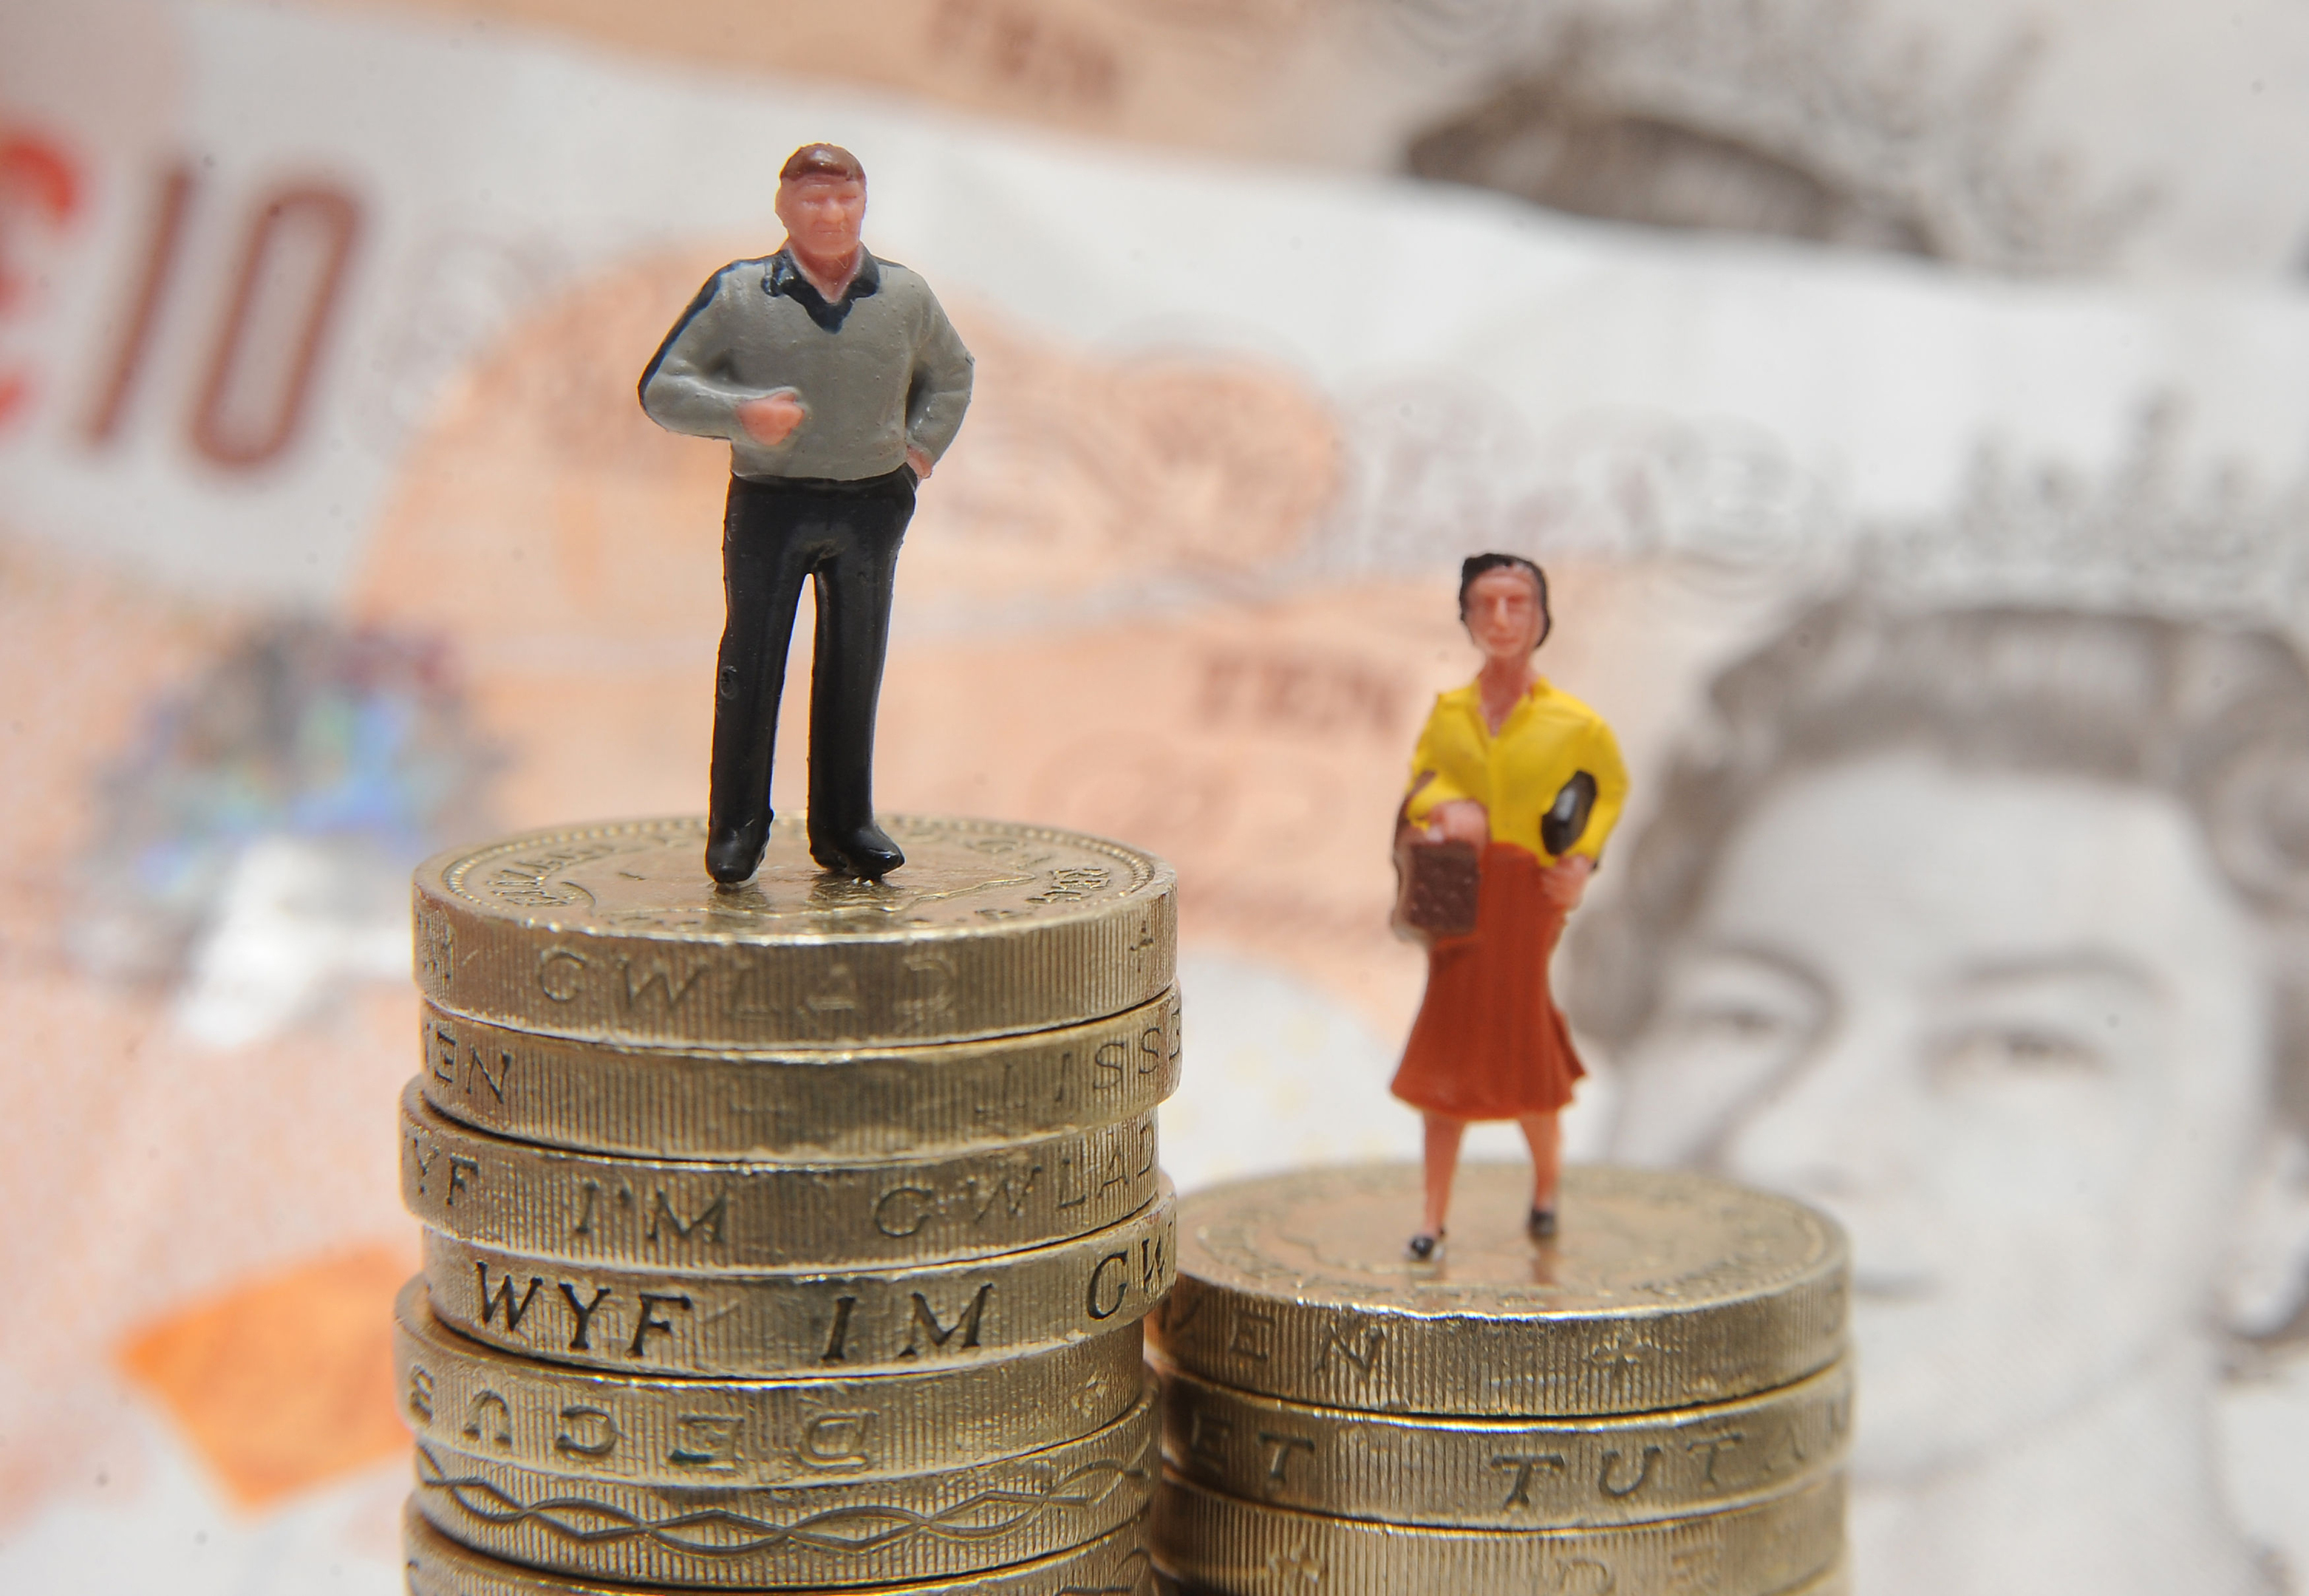 On average, a woman retiring in 2017 will be £6,400 a year worse off than a man retiring this year, according to research from Prudential. (Joe Giddens/PA Wire)